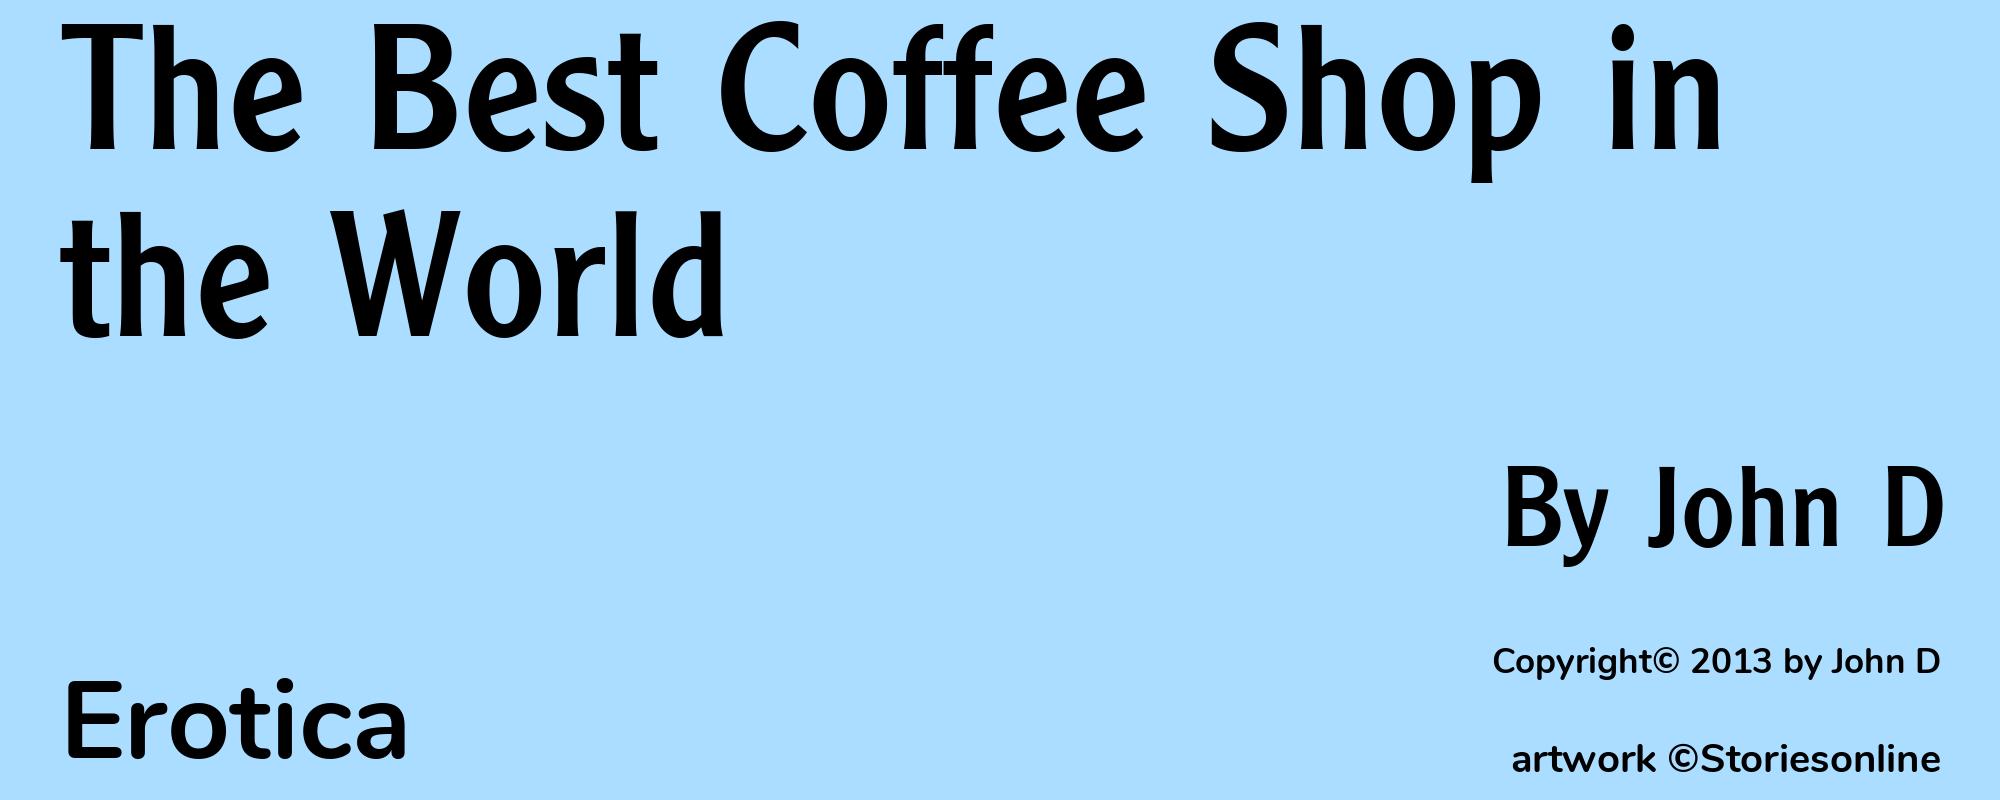 The Best Coffee Shop in the World - Cover